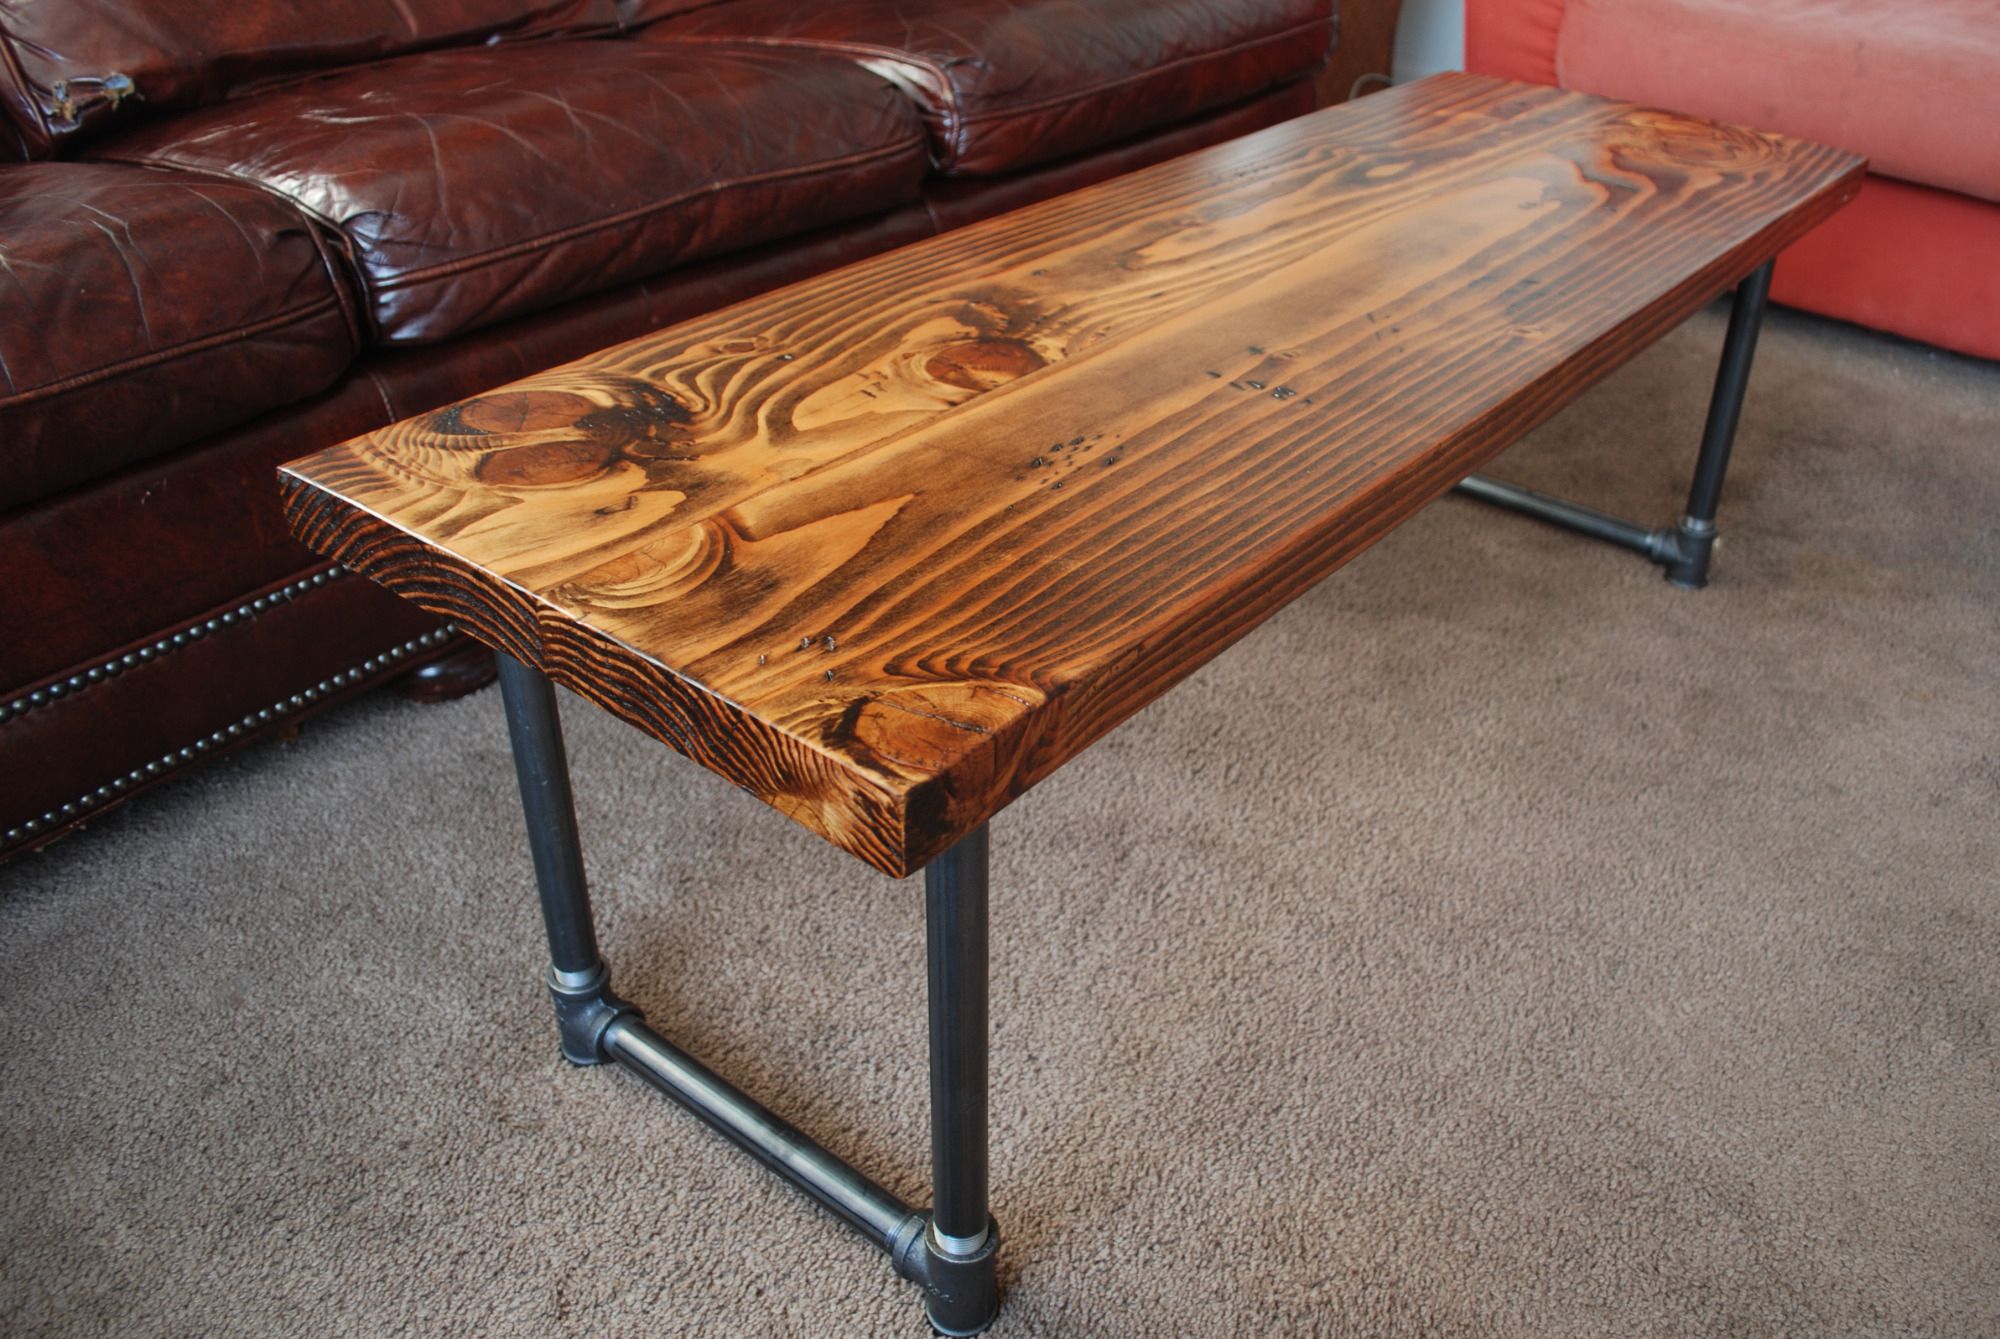 Preferred Oak Wood And Metal Legs Coffee Tables For 8 Rustic Wood And Wrought Iron Coffee Table Photos (View 14 of 20)